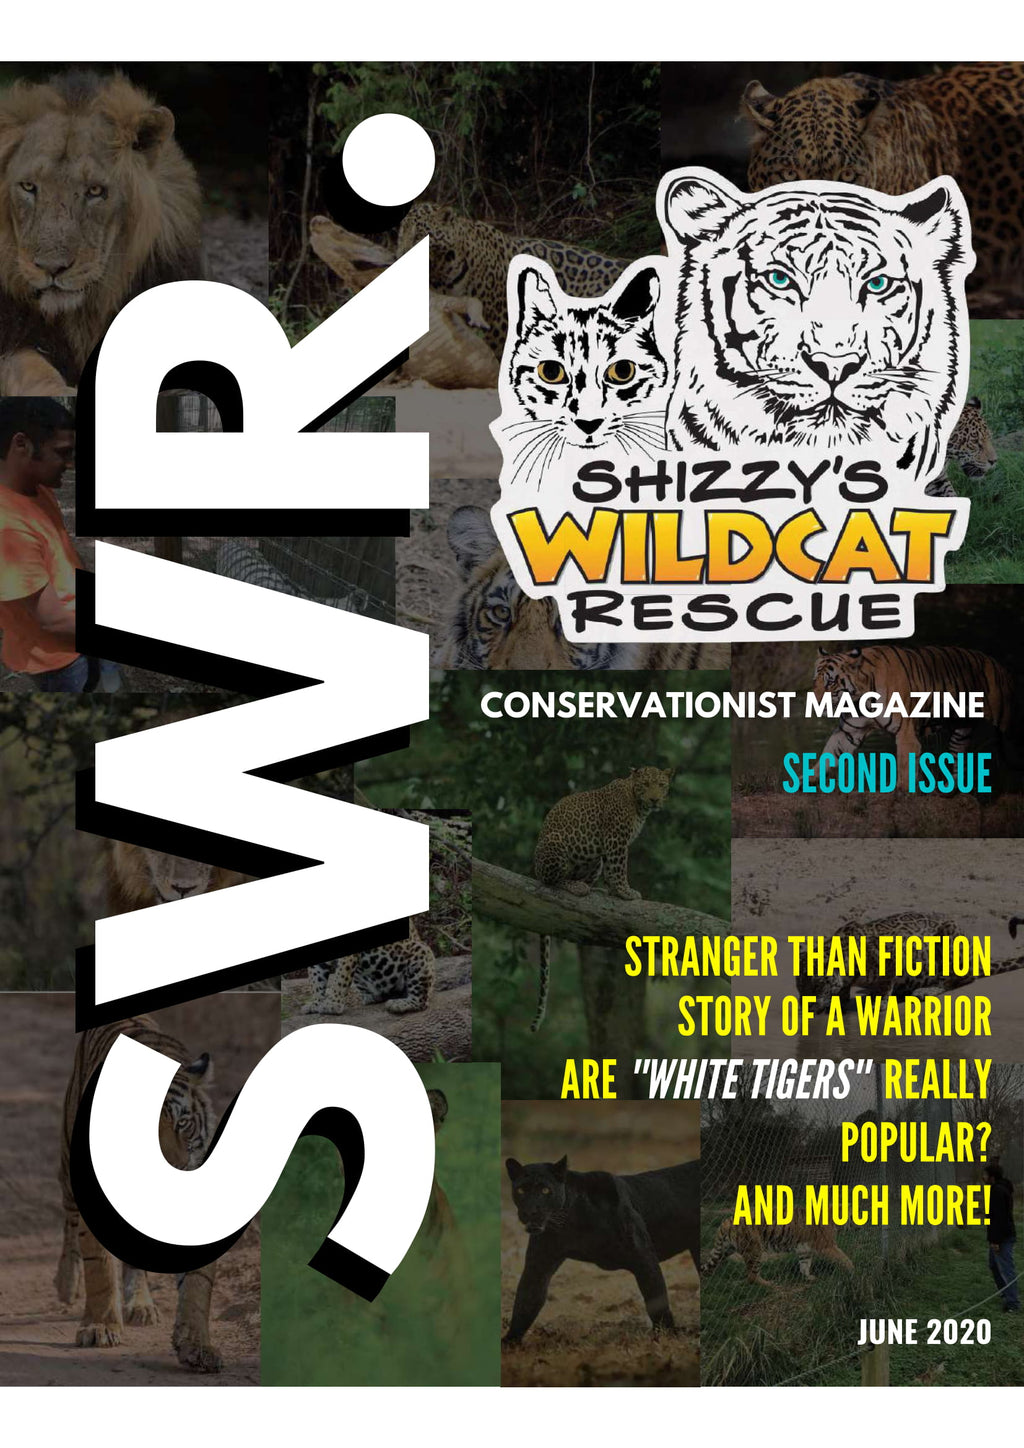 The SWR Digital Wildlife Magazine  (previous month's issue)